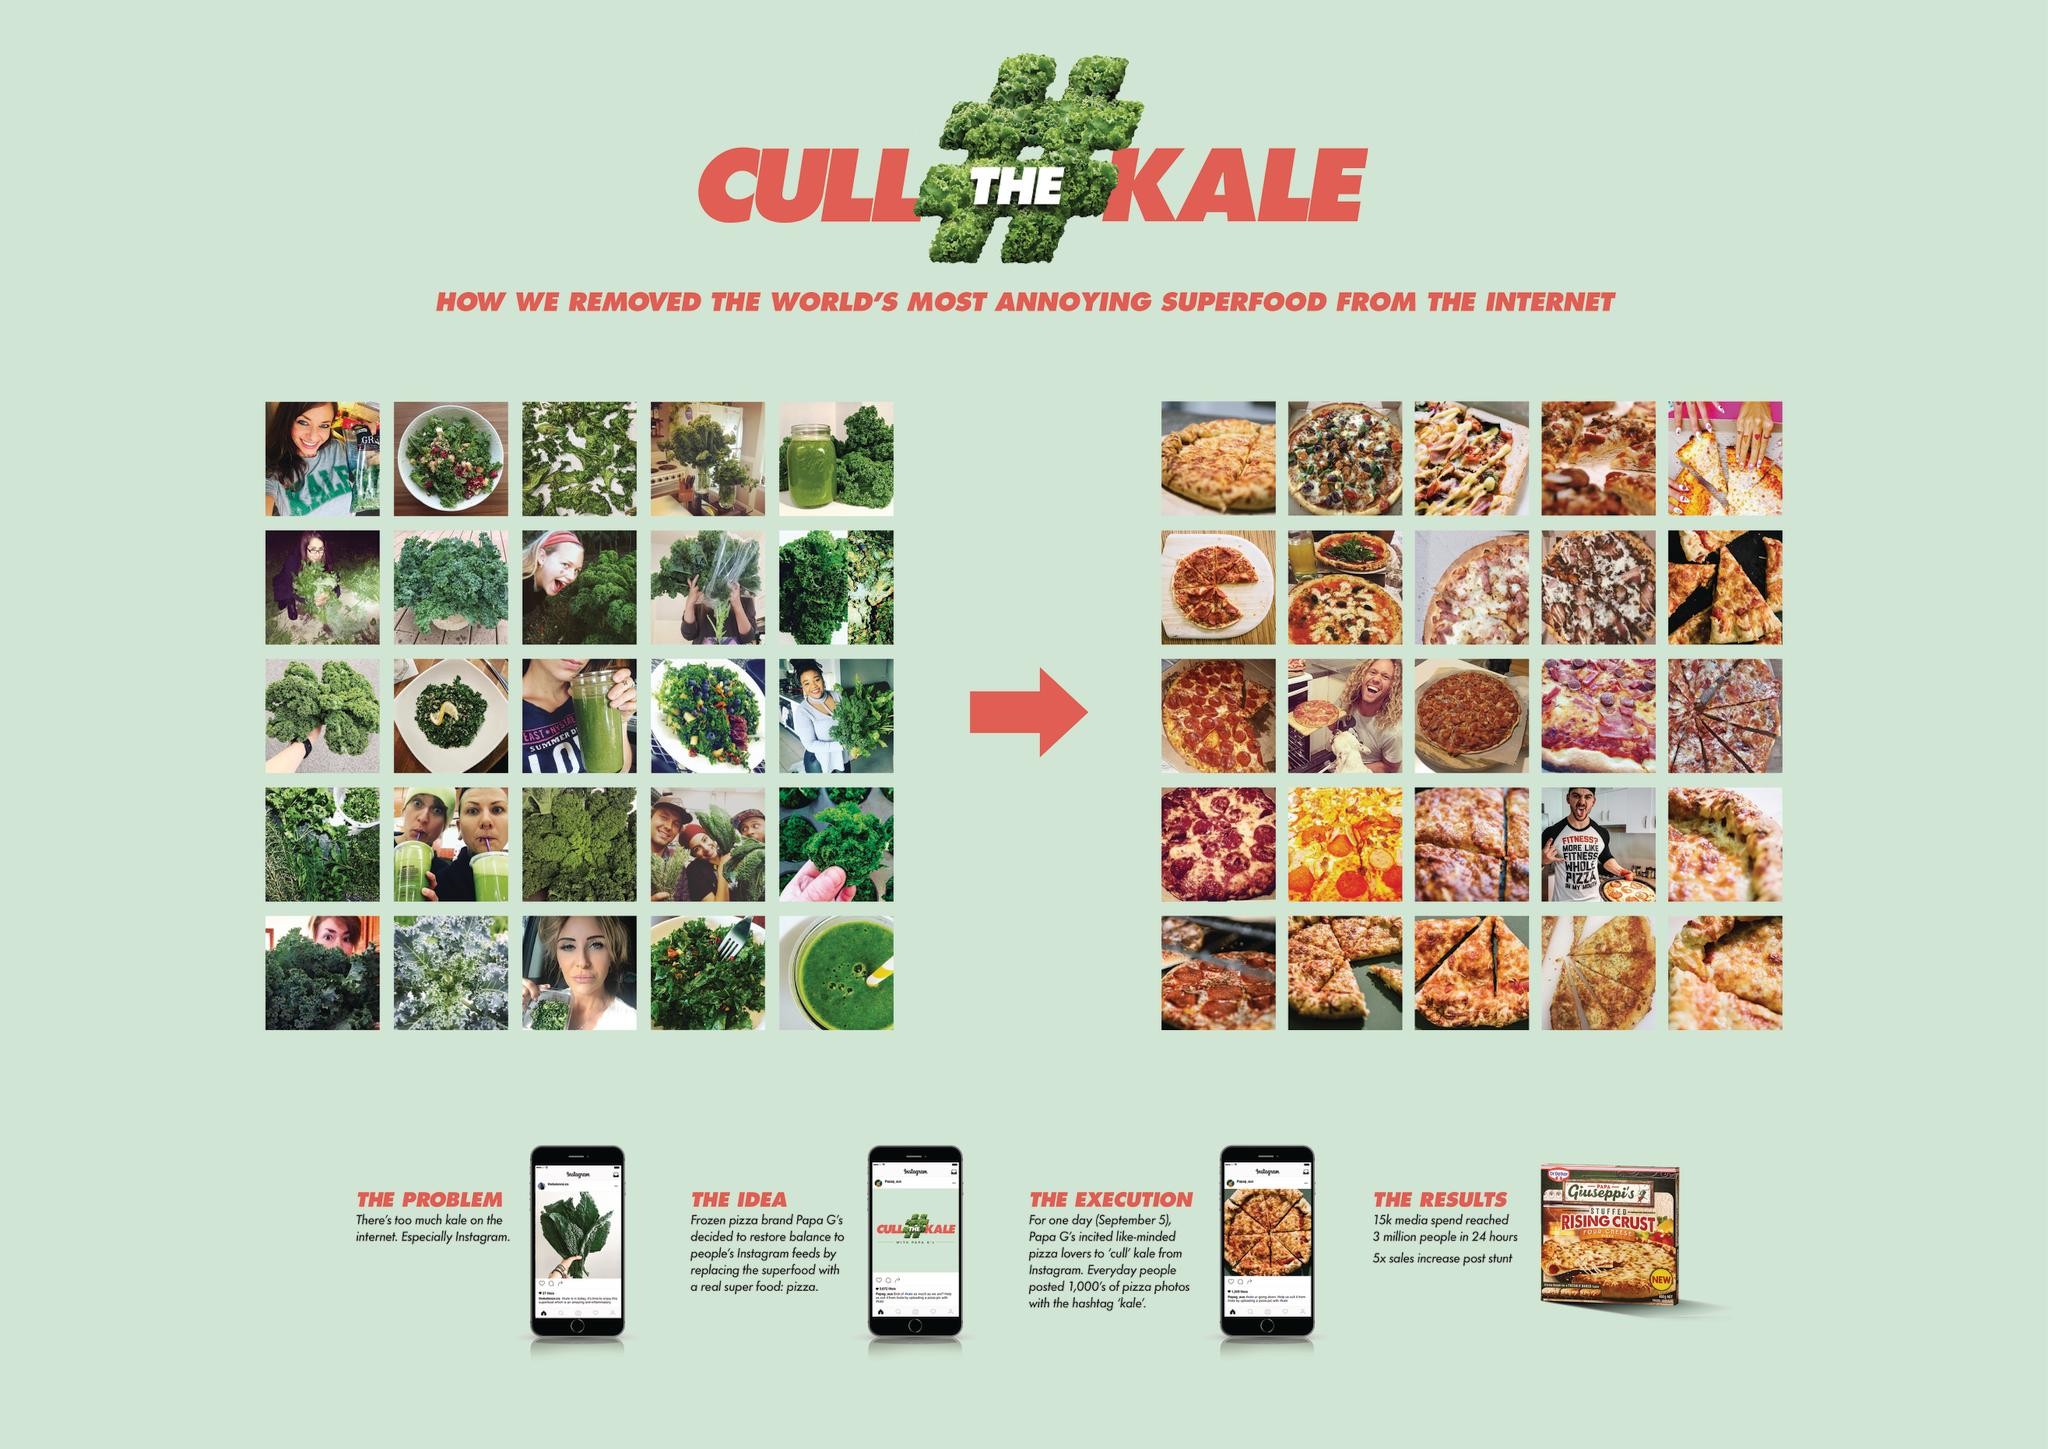 Cull the Kale